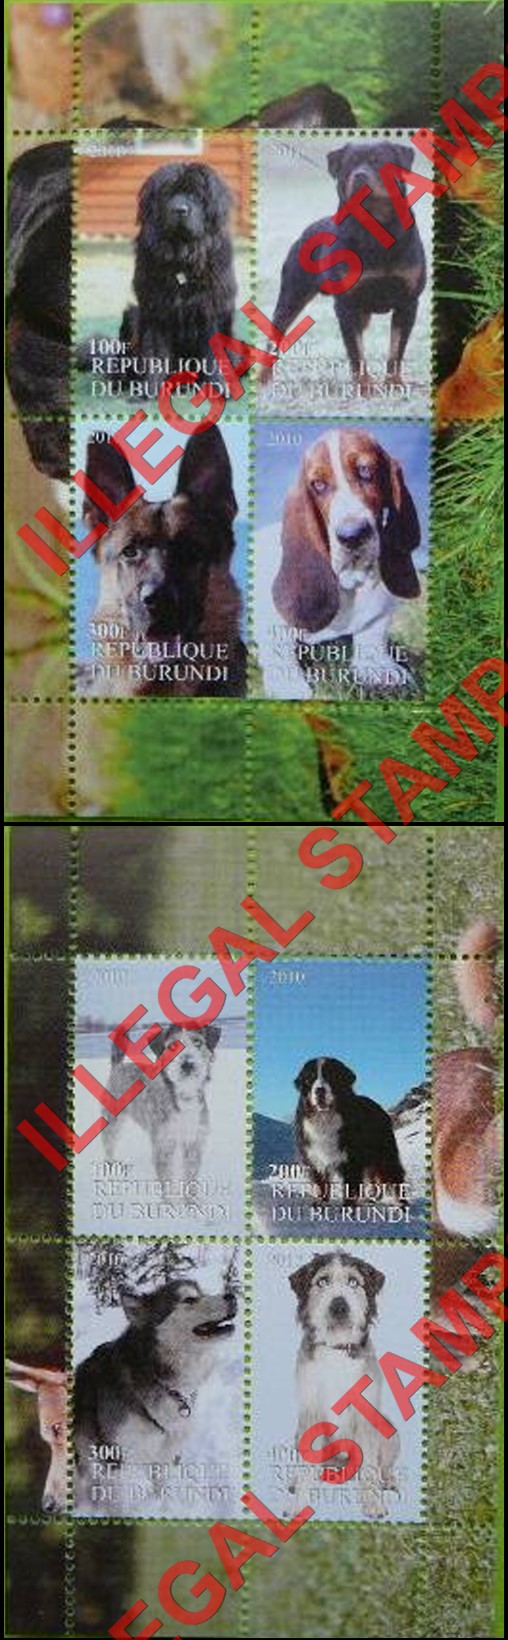 Burundi 2010 Dogs (different) Counterfeit Illegal Stamp Souvenir Sheets of 4 (Part 1)